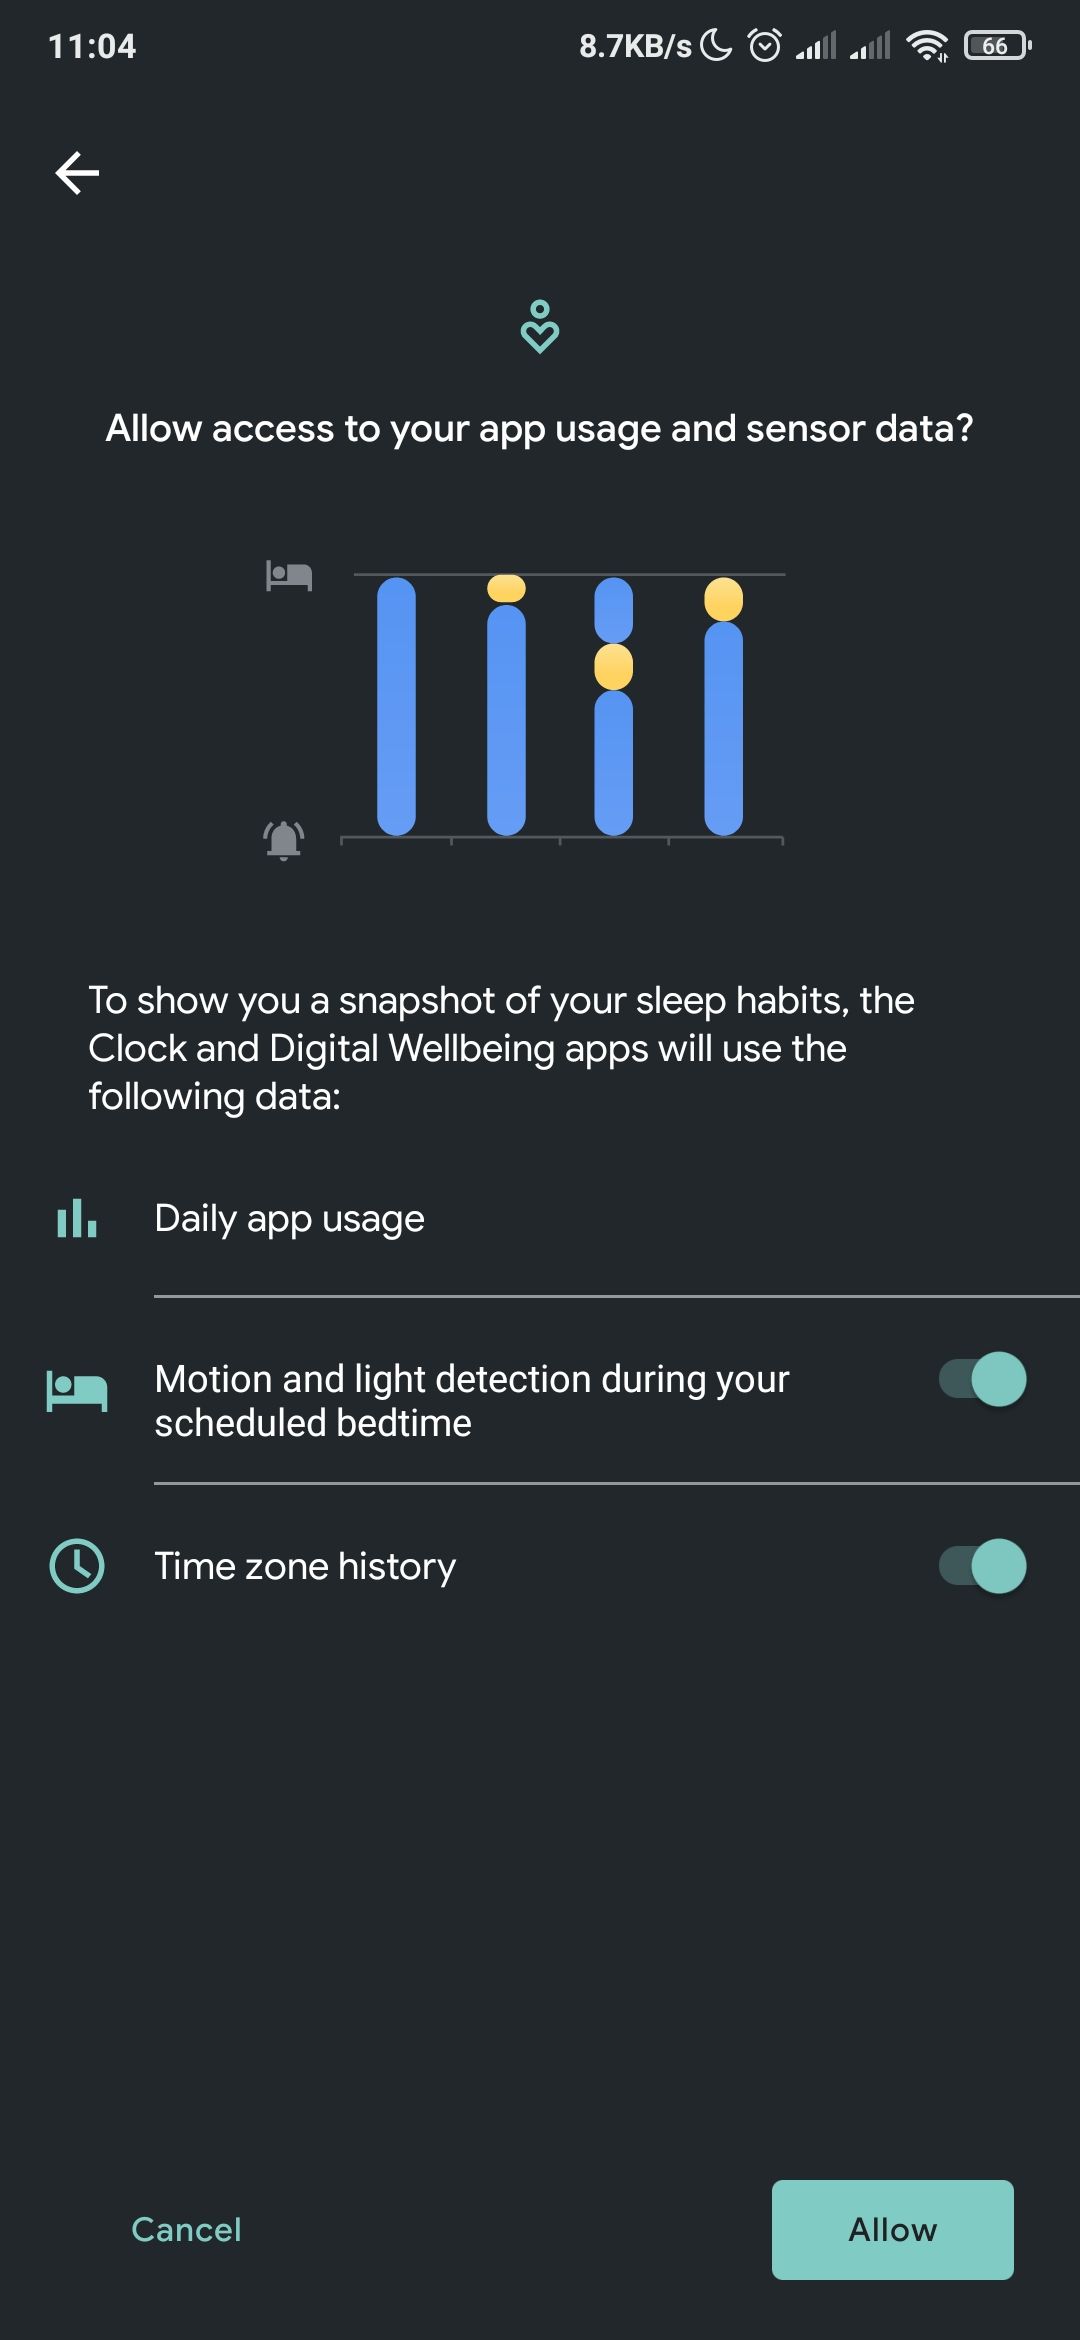 Setting up bedtime activity tracking in Google's clock app